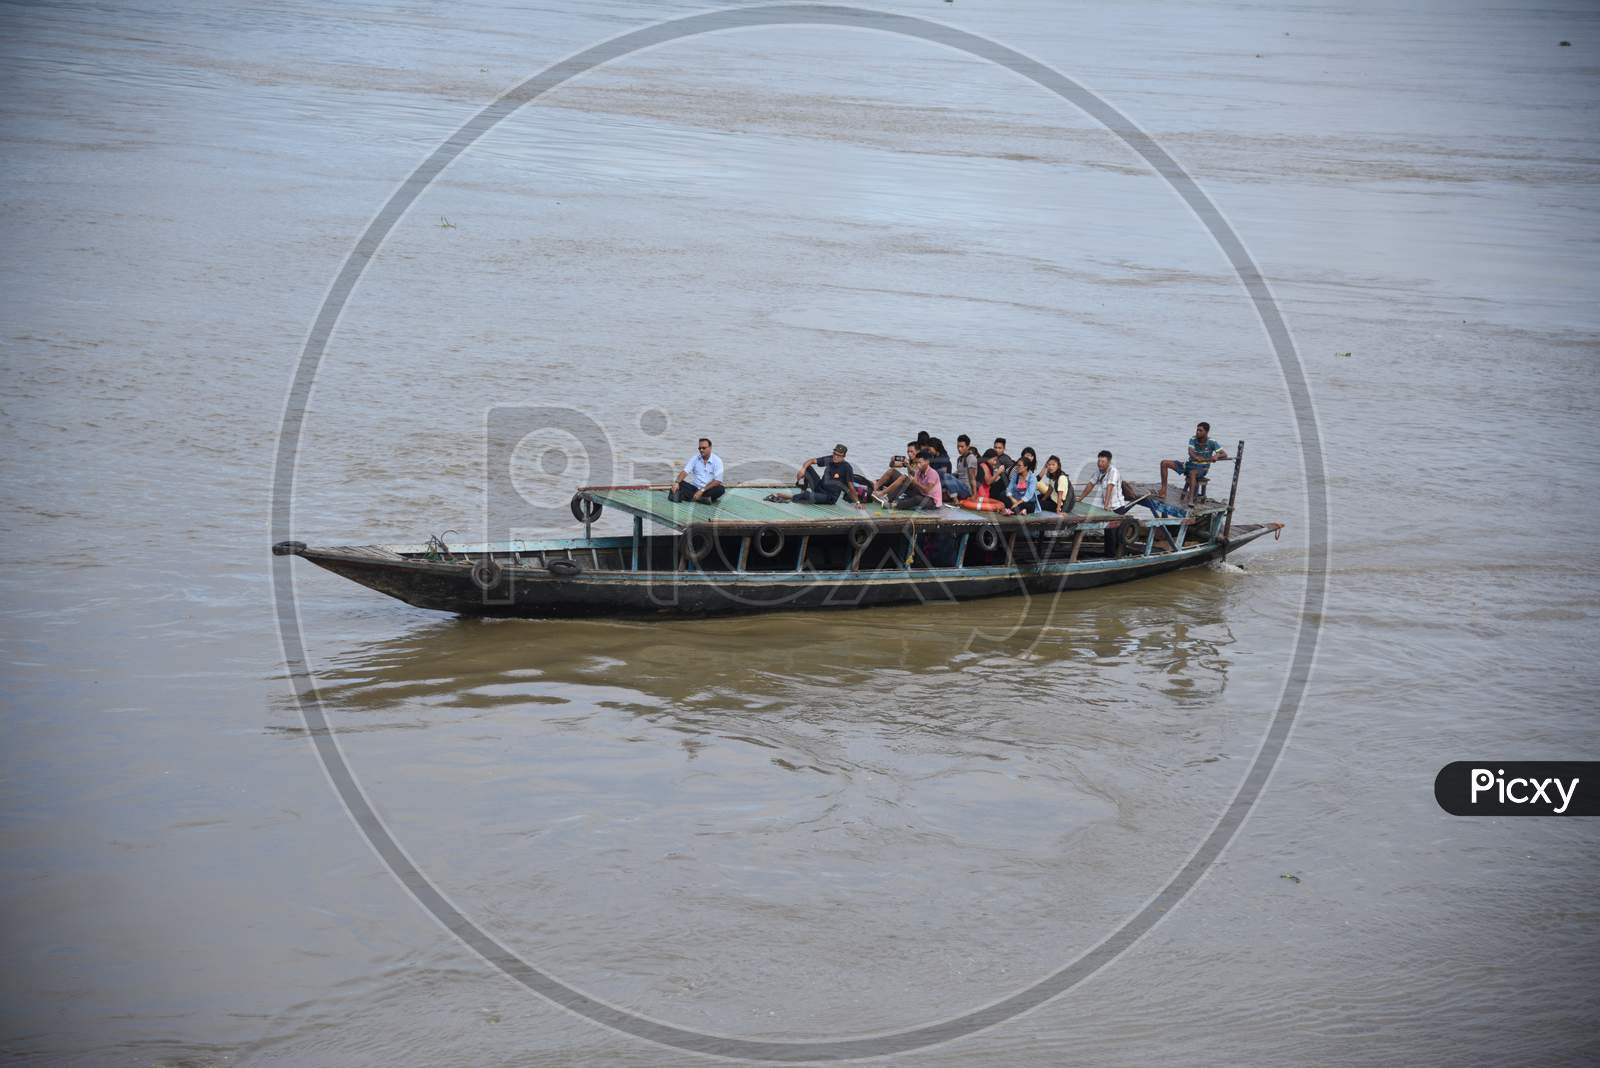 People from India's northeastern states travel on a boat through the waters of river Brahmaputra, back to their homes at Nimati Ghat, August 21, 2012